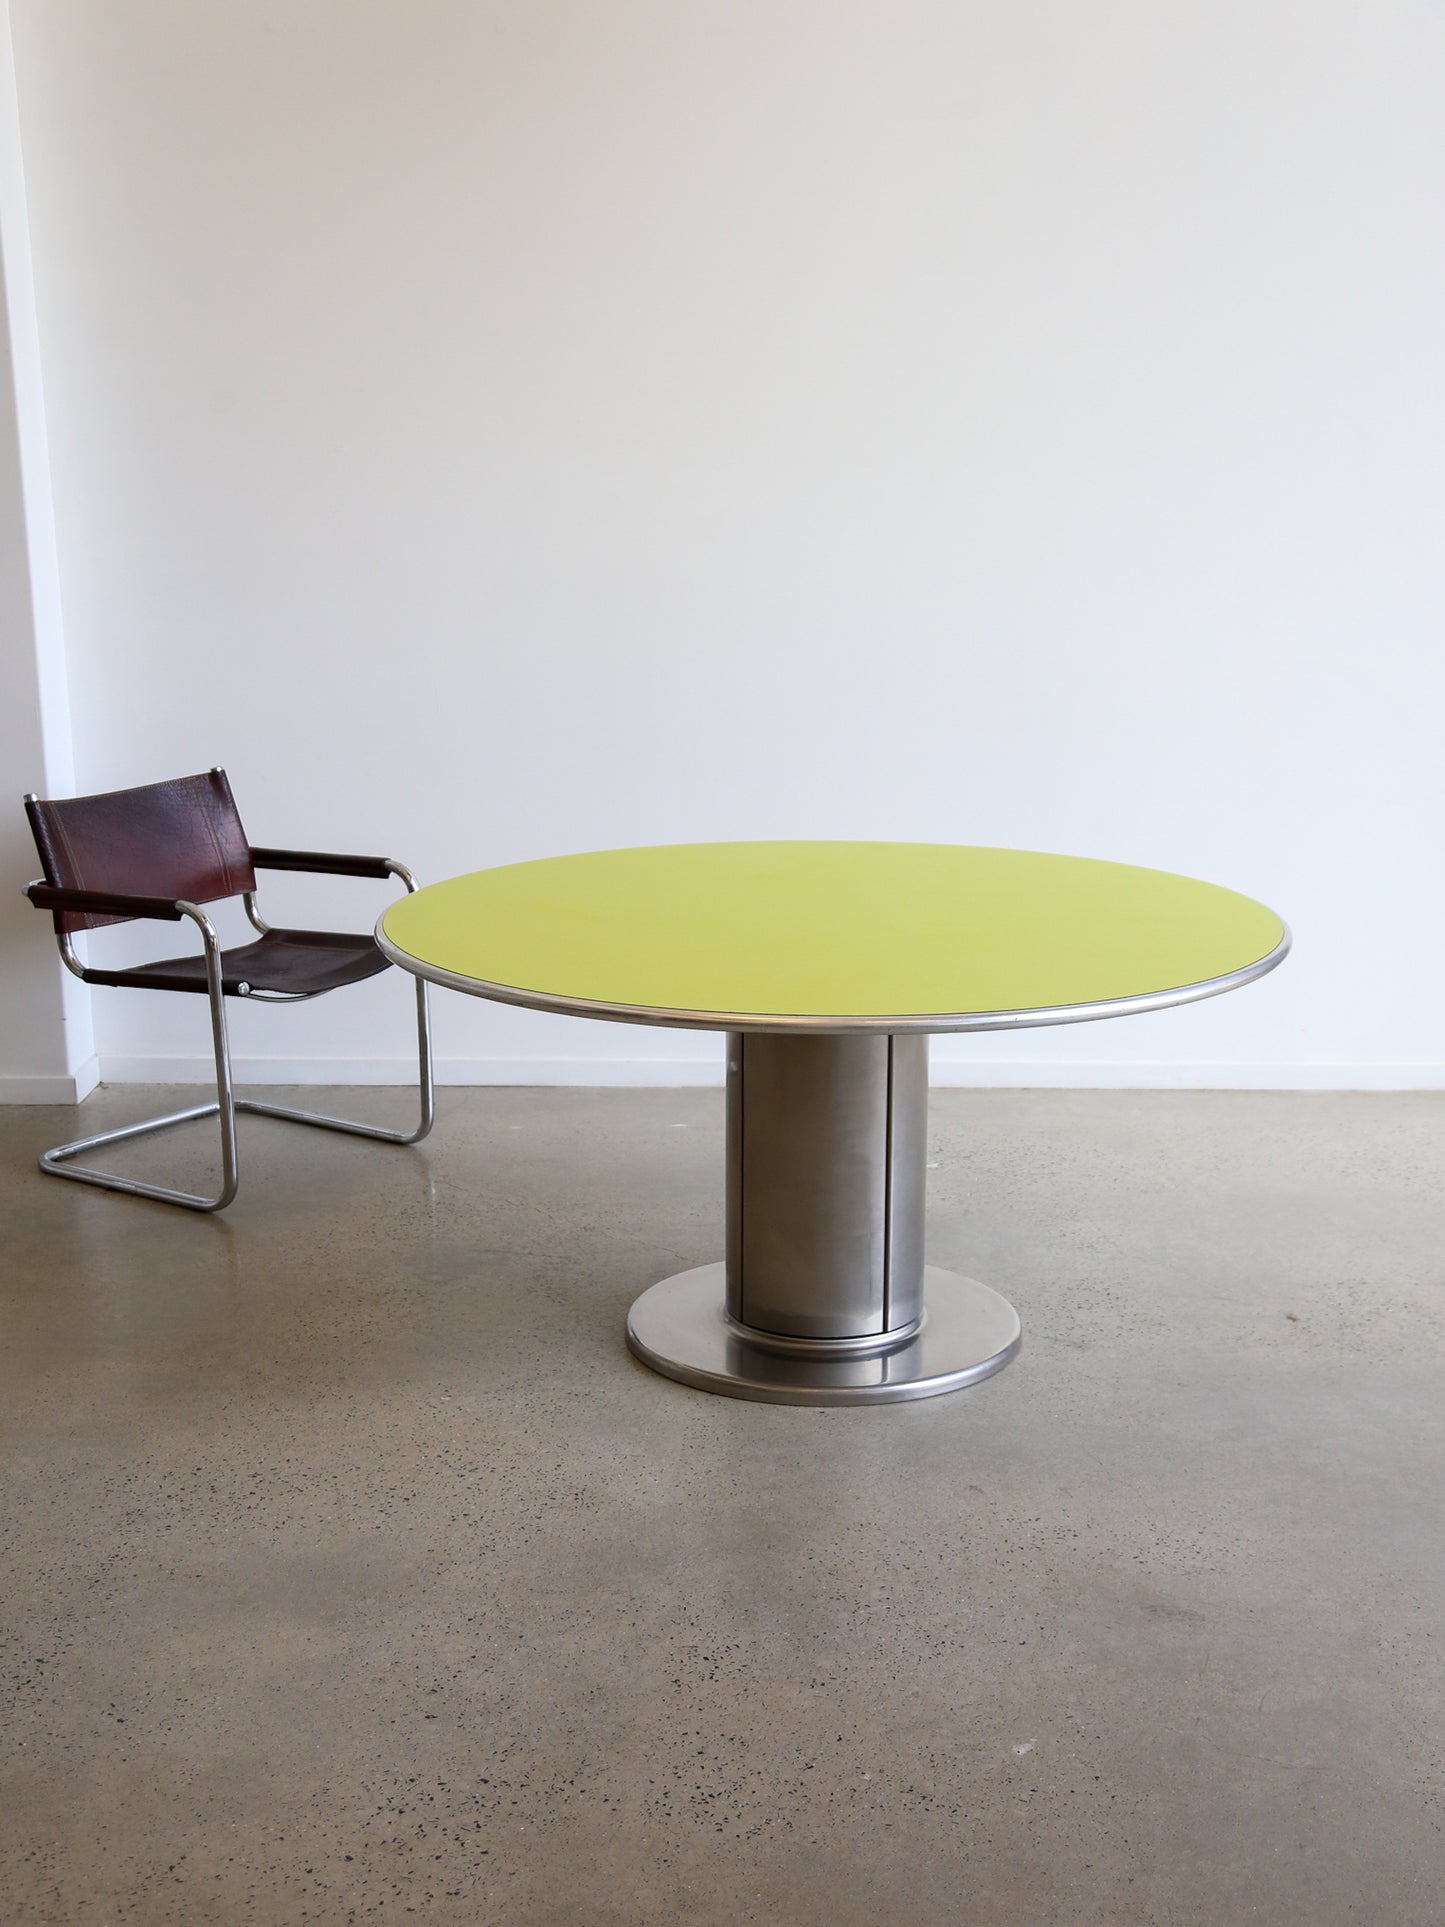 “Cidonio” Dining Table by Antonia Astori for Cidue, Italy 1960